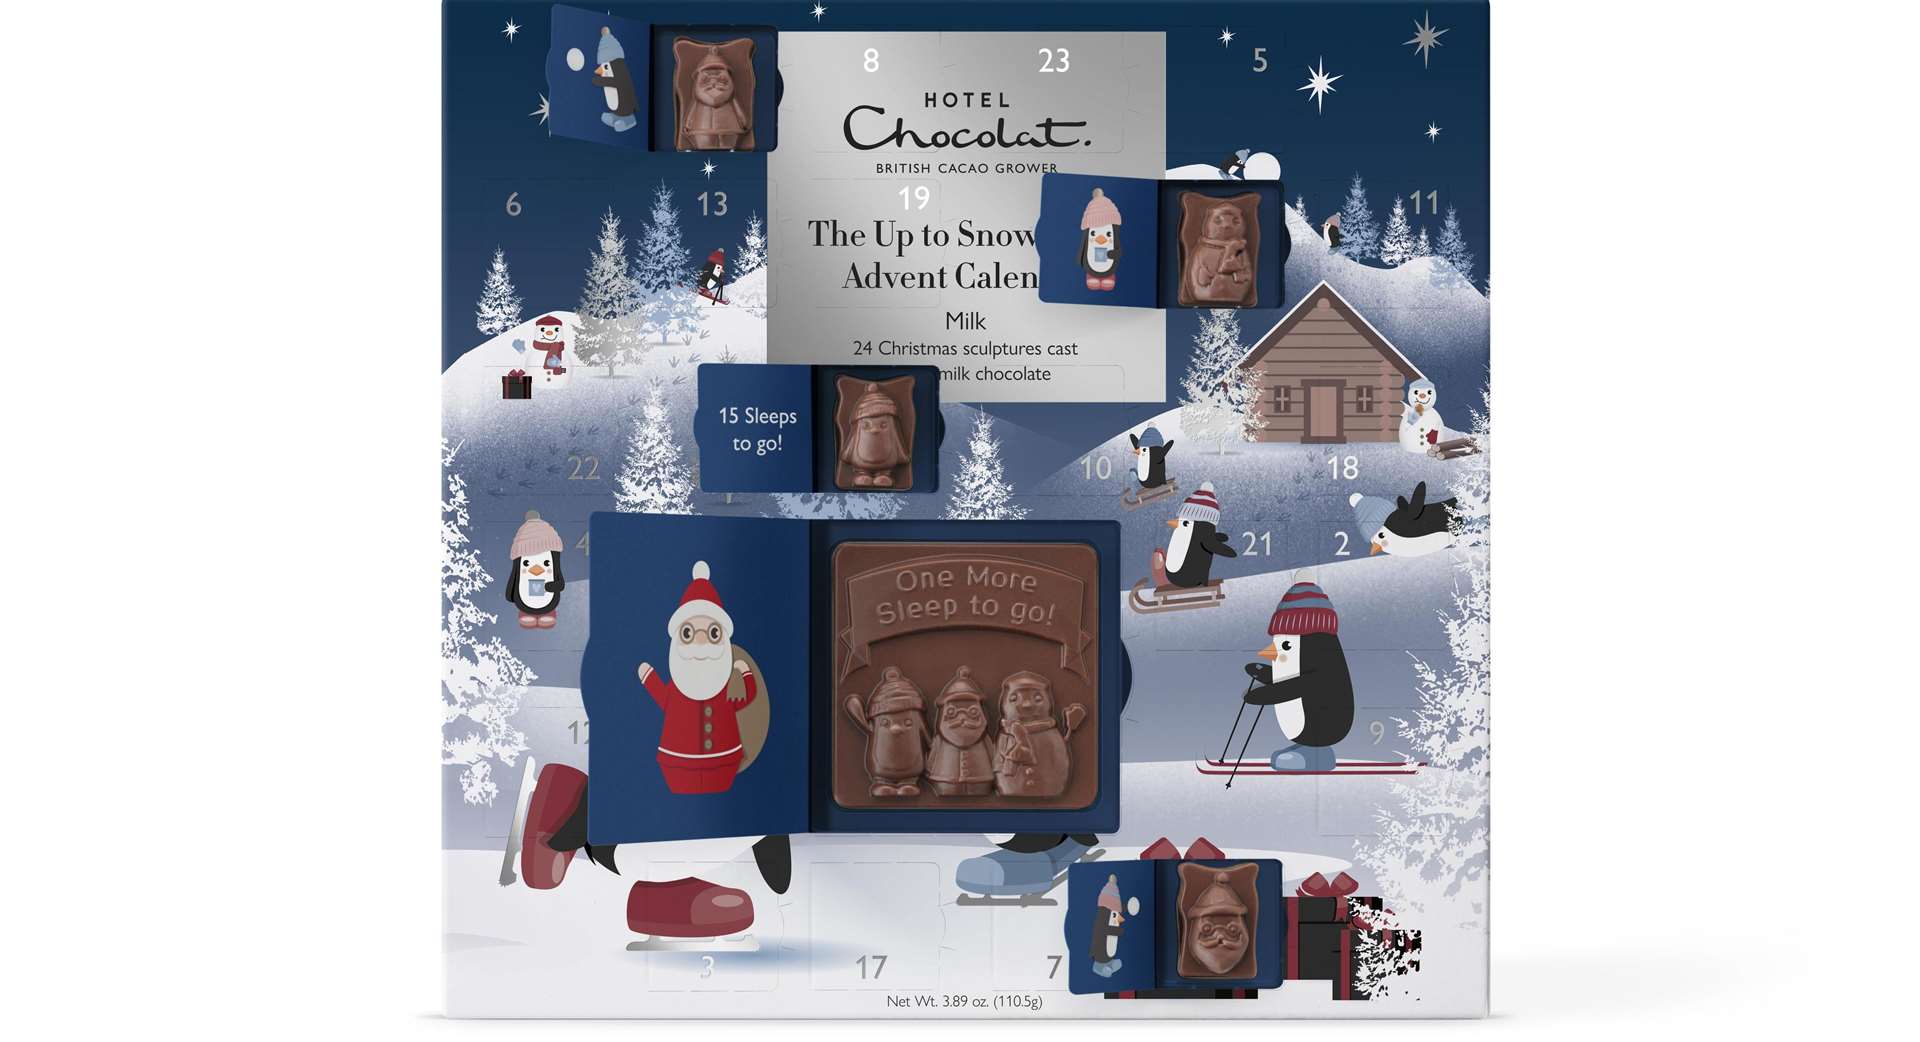 Hotel Chocolat have an advent calendar for kids big and small